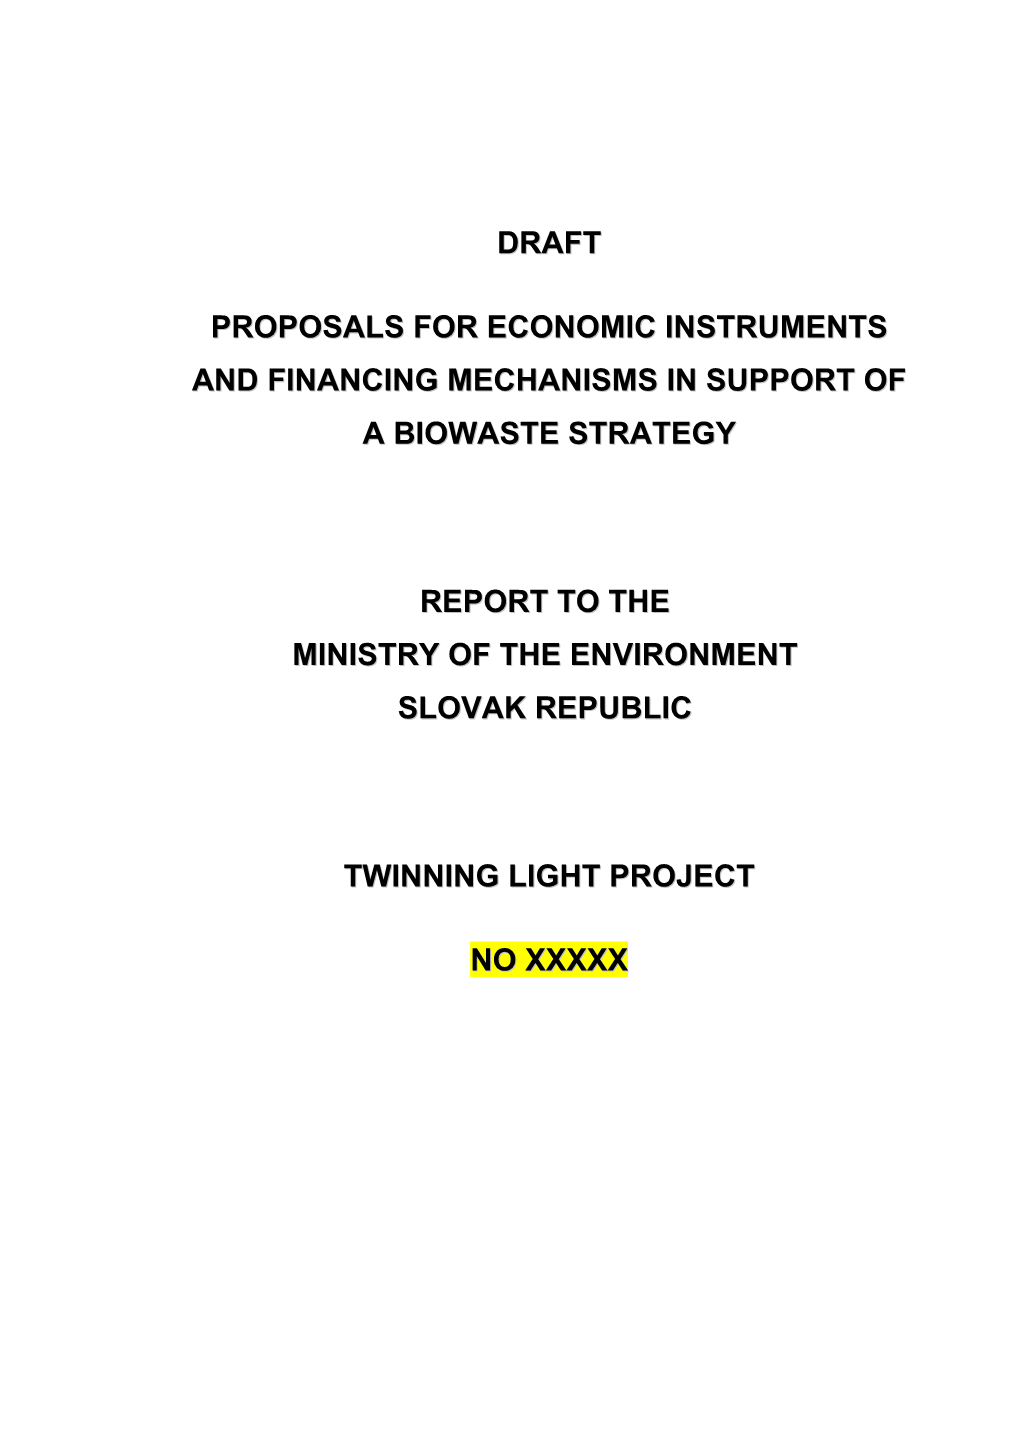 Proposals for Economic Instruments and Financing Mechanisms in Support of a Biowaste Strategy